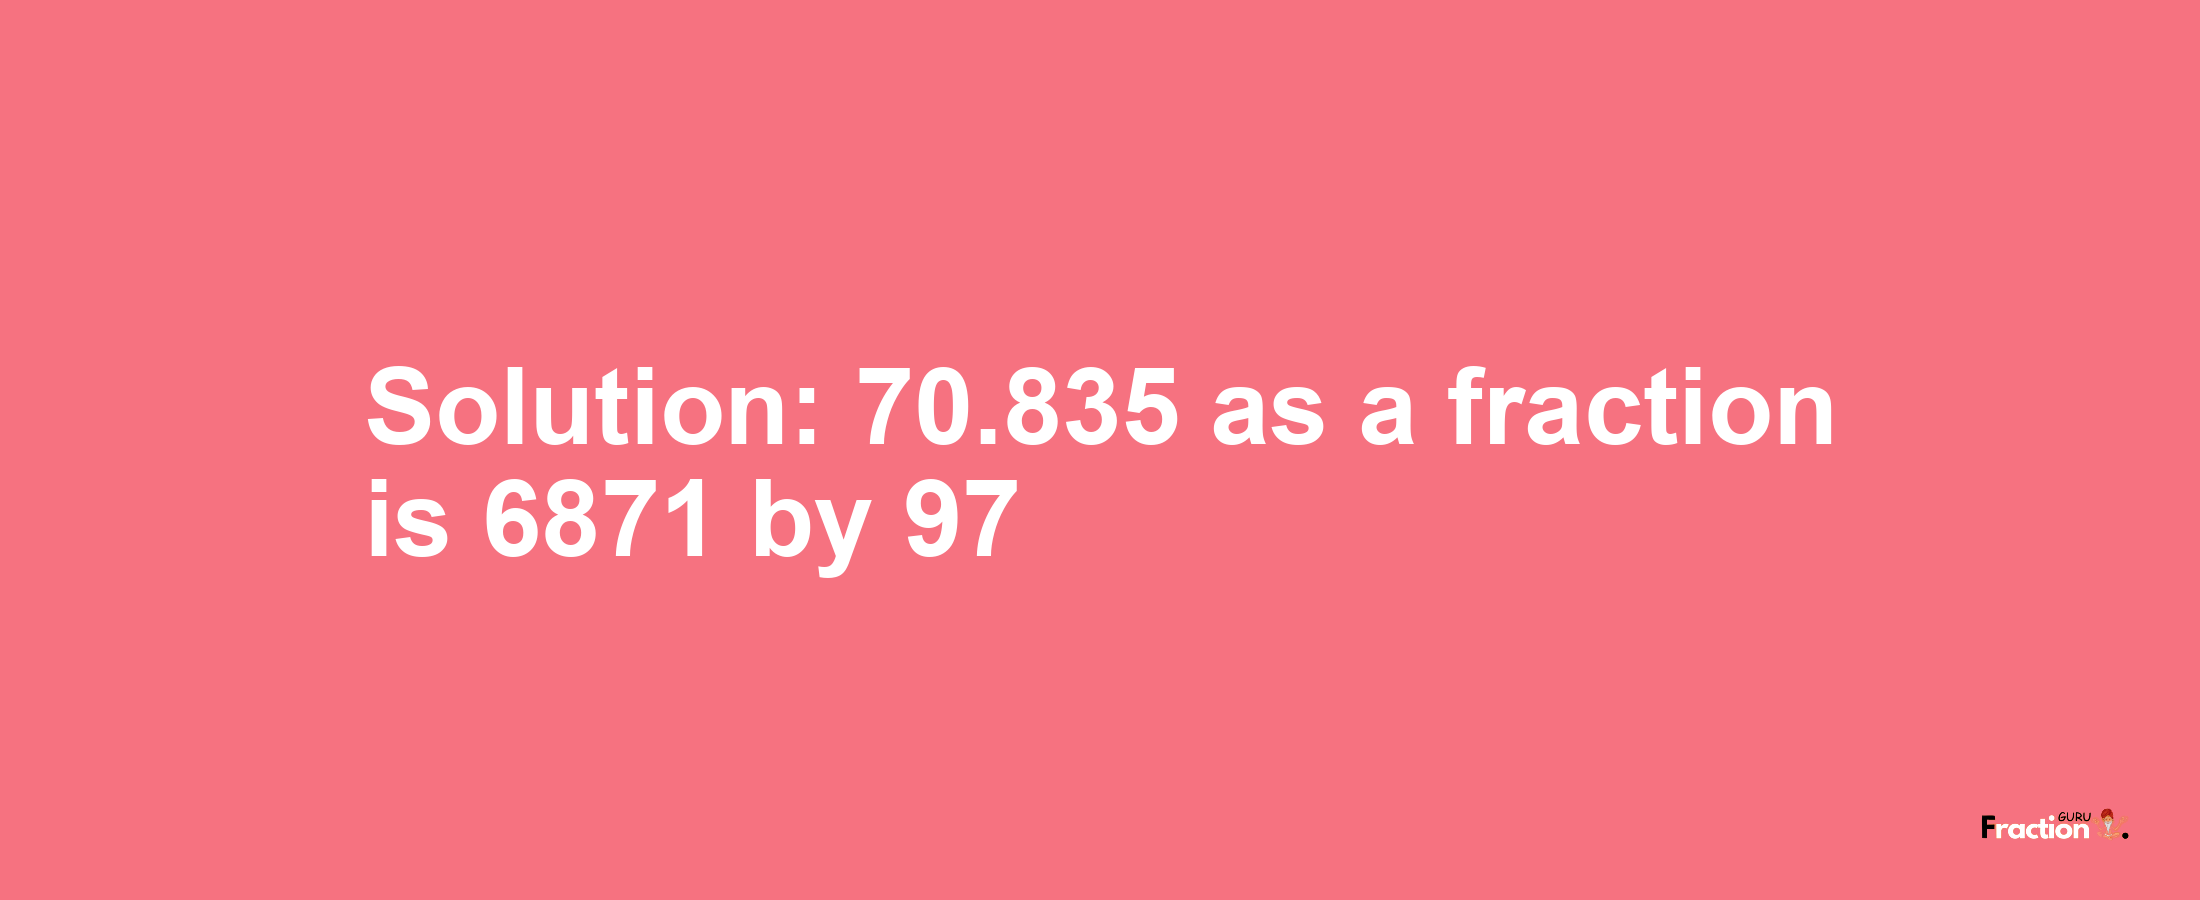 Solution:70.835 as a fraction is 6871/97